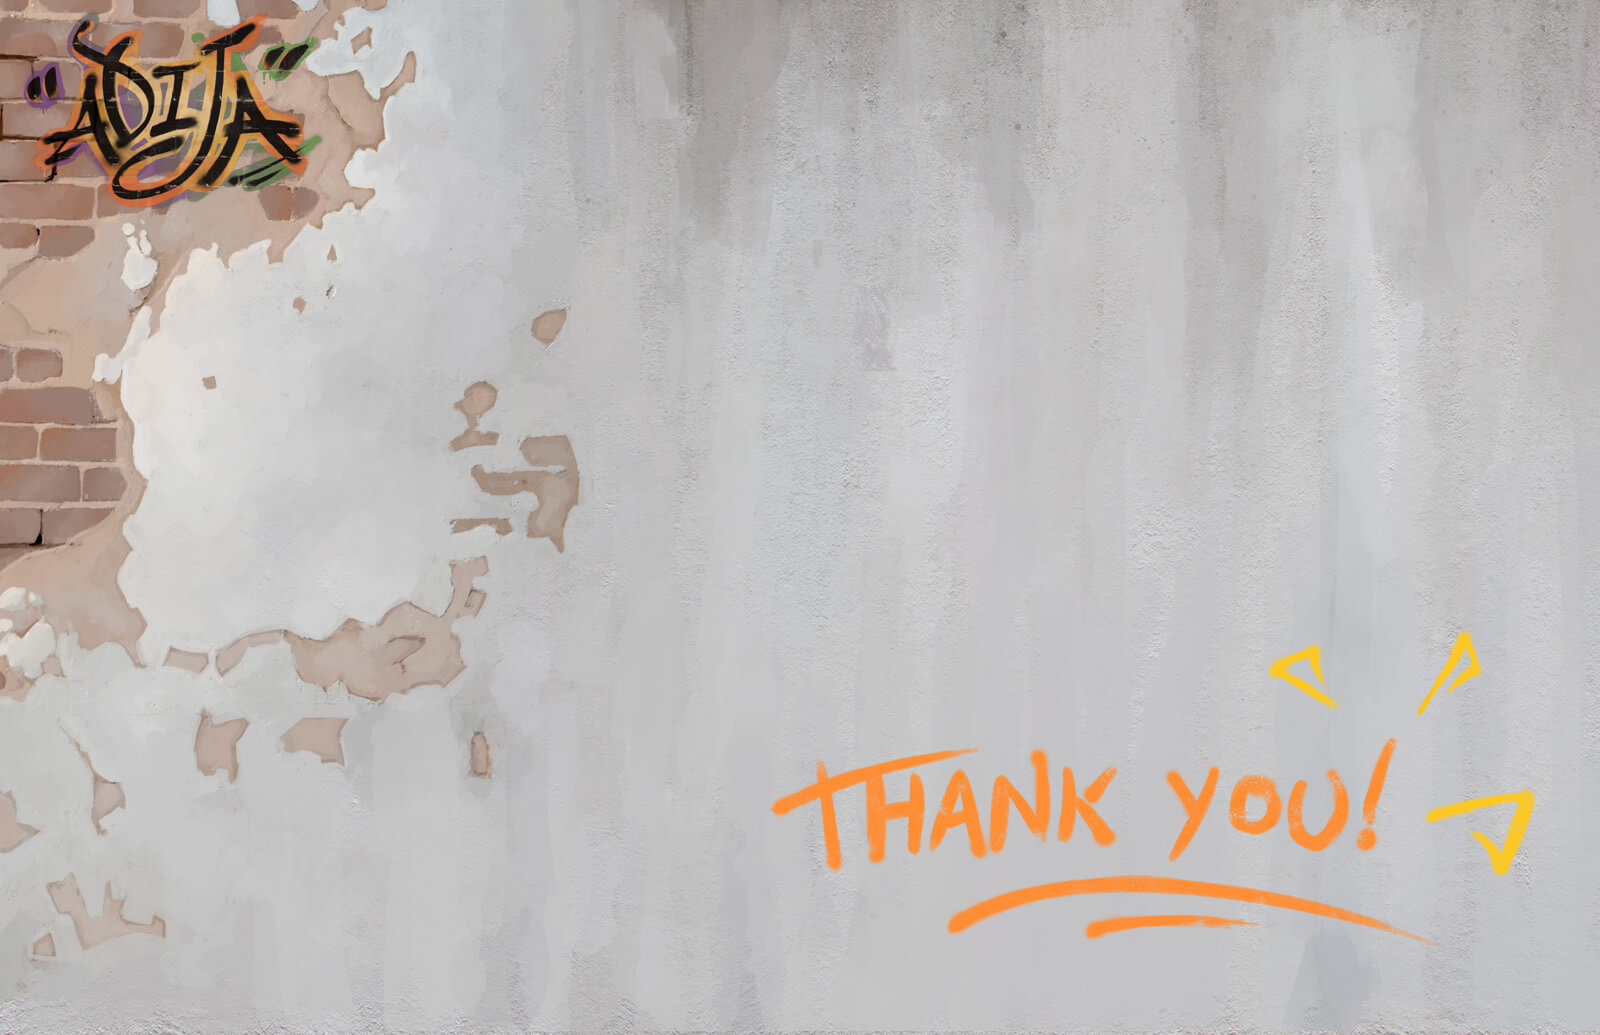 Presentation slide of a bare plastered brick wall with "Thank You!" written in orange in the bottom-right corner